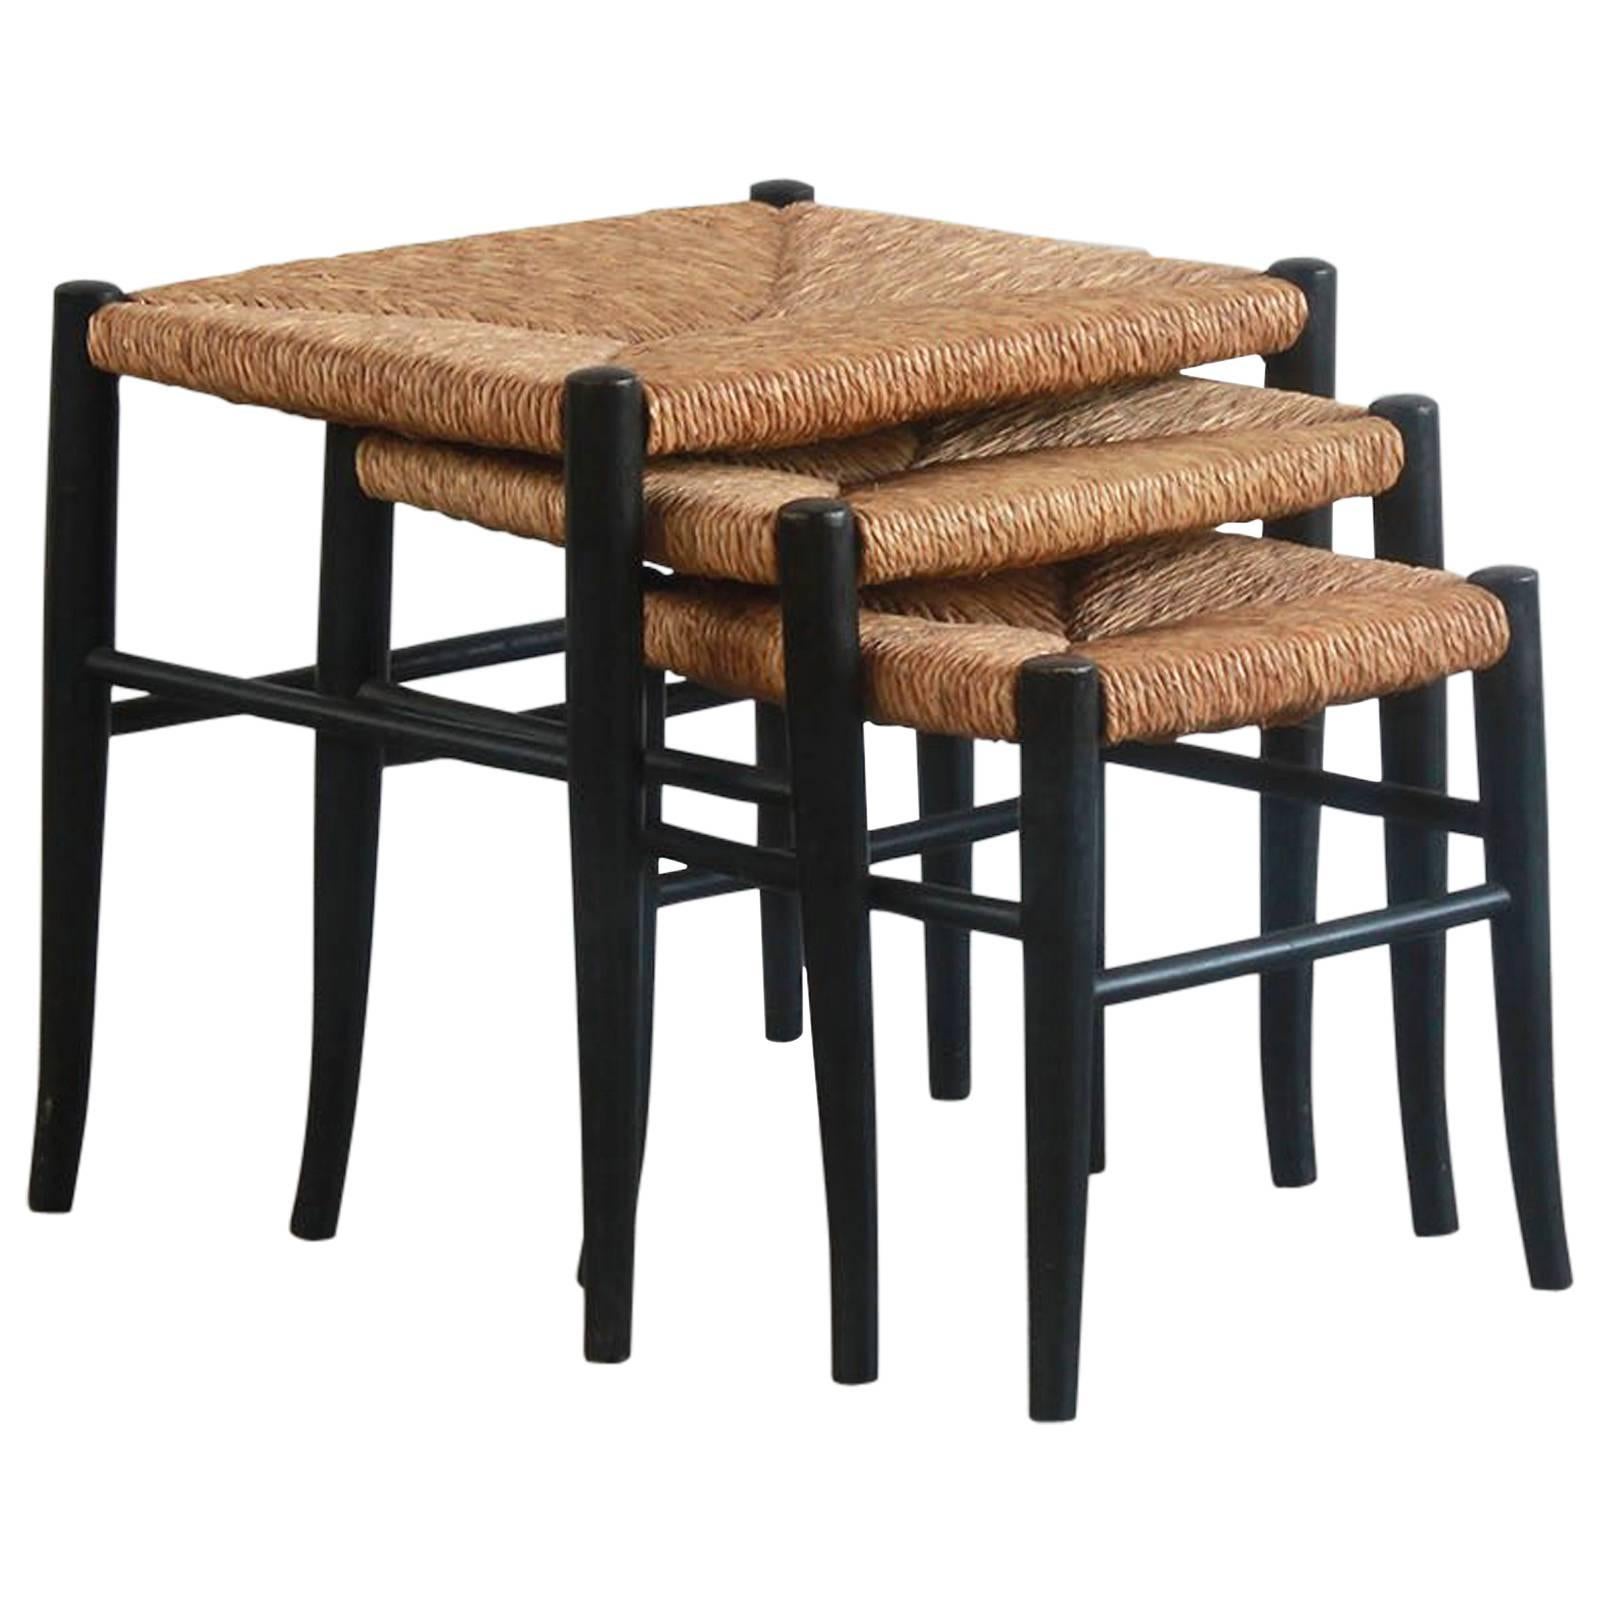 Set of Three Wicker and Black Nesting Tables